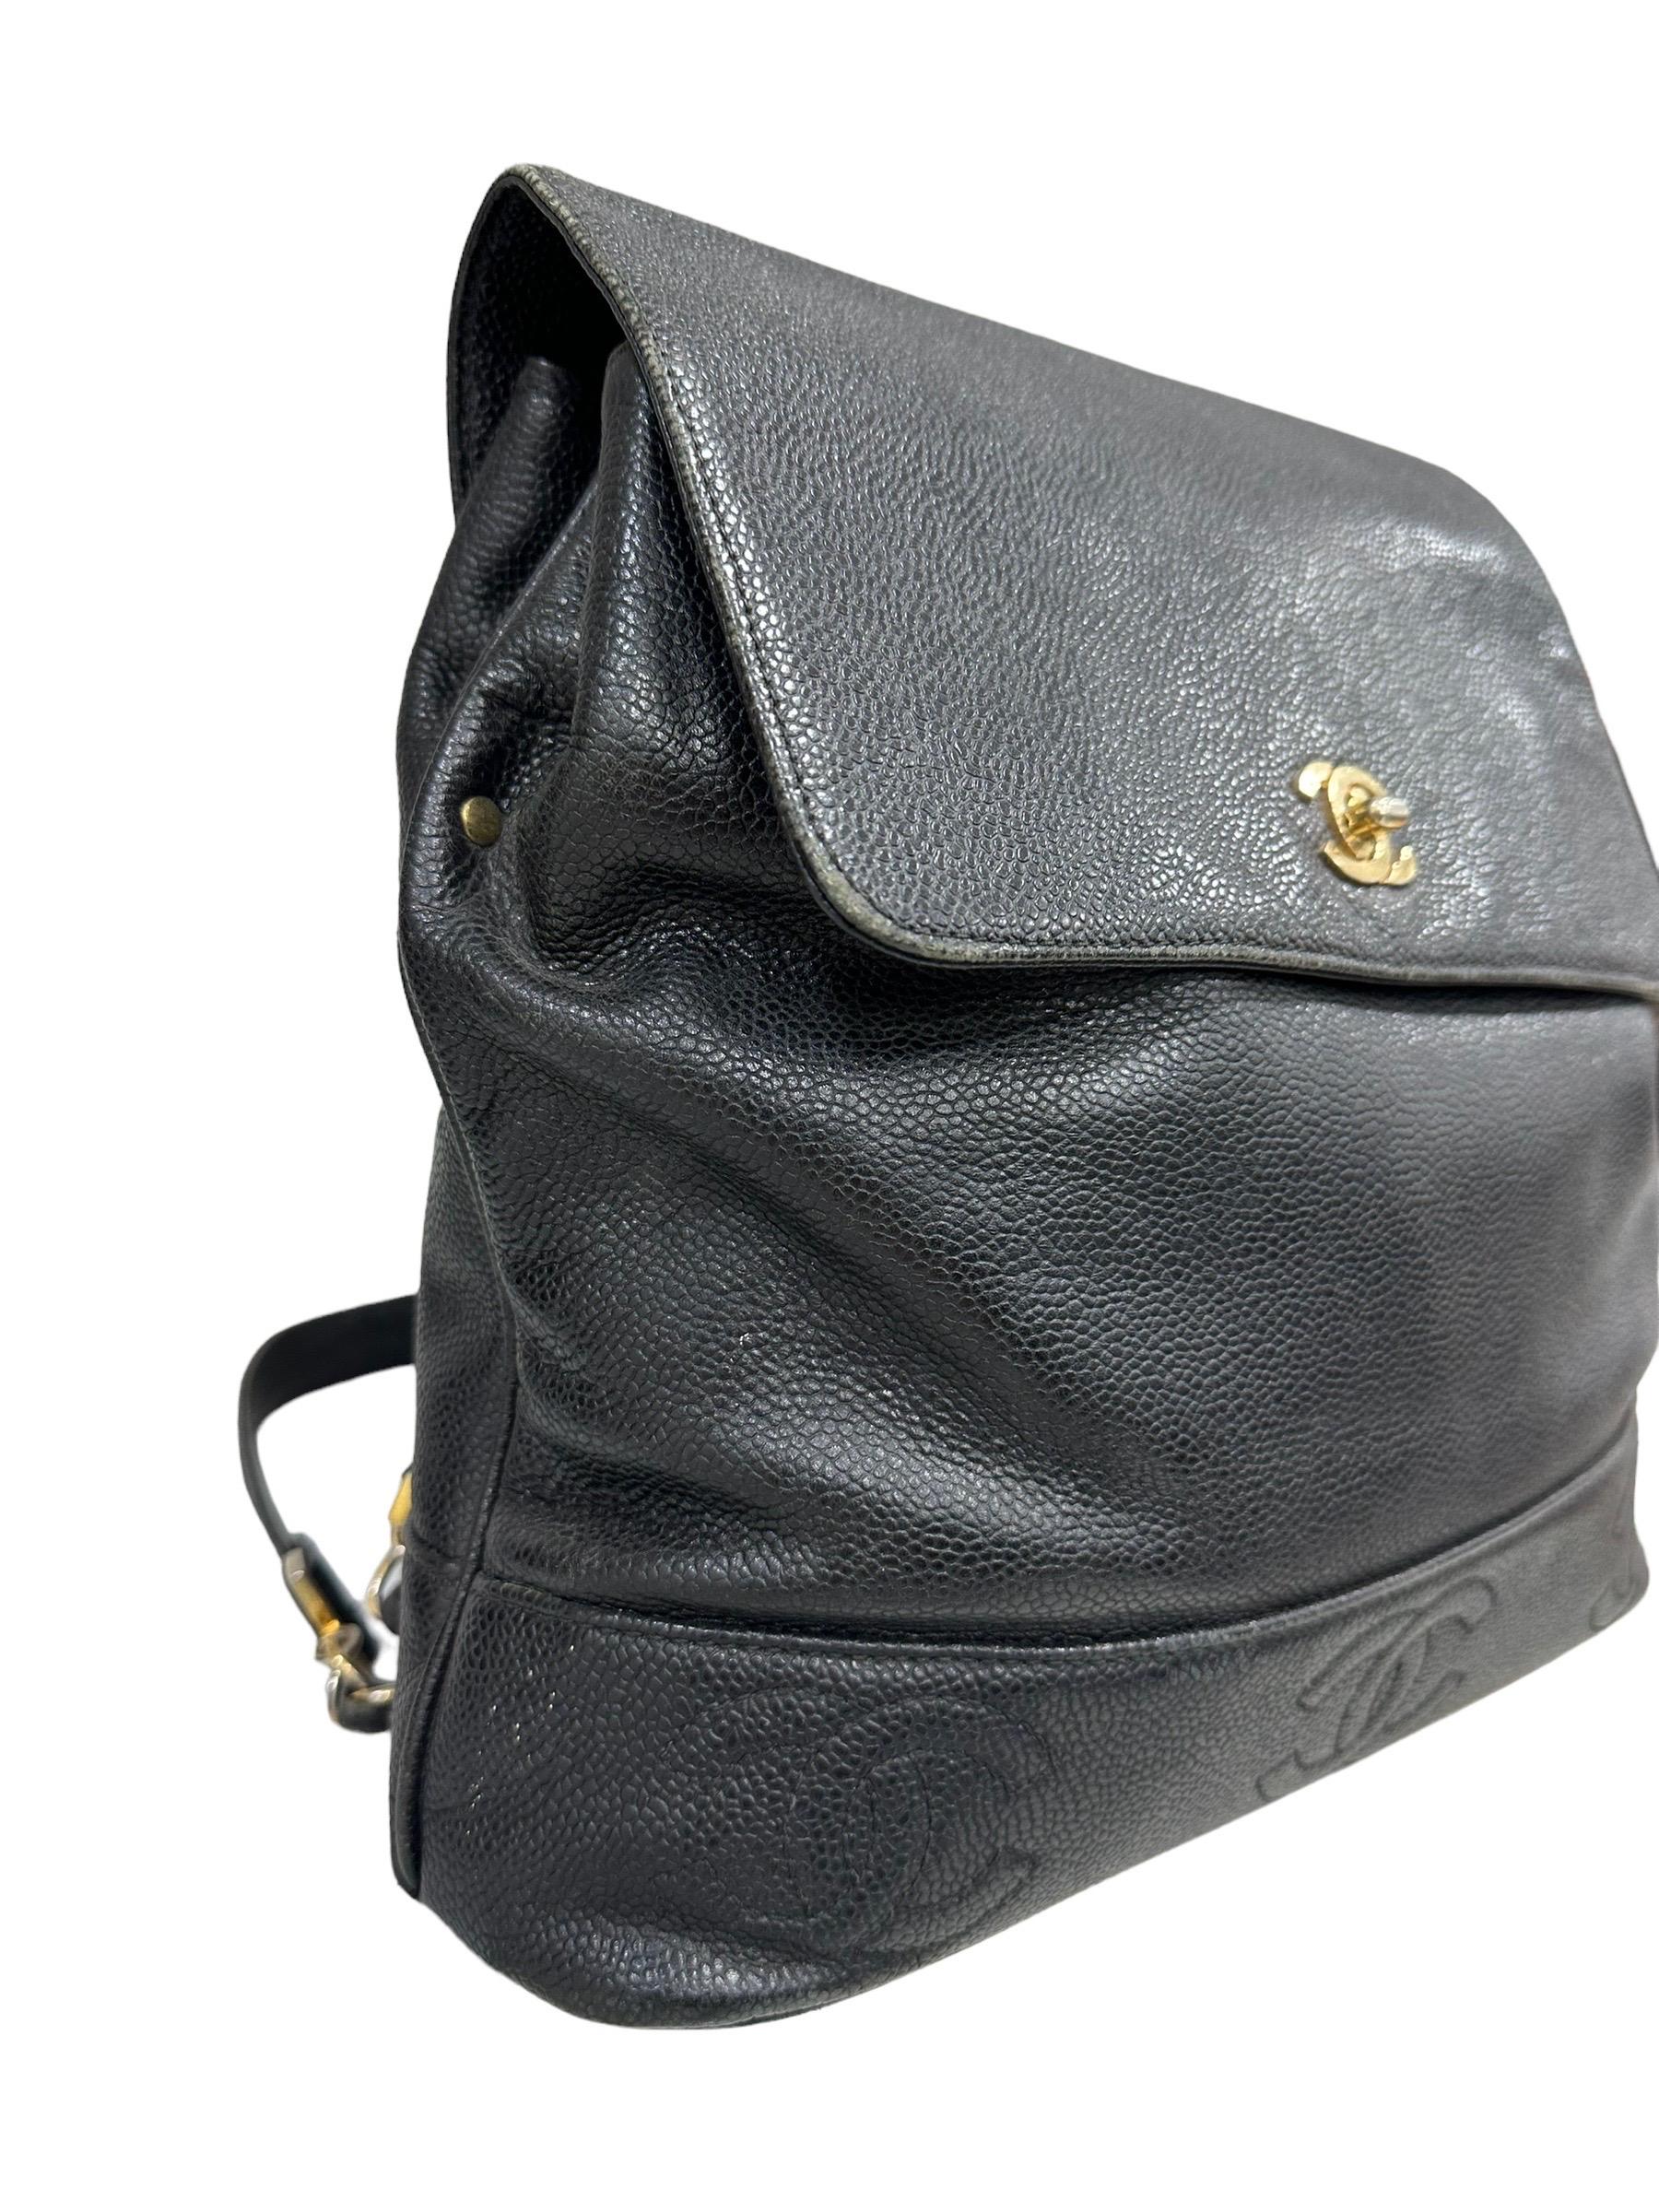 Vintage backpack signed Chanel, vinatege model, made of black grained leather with golden hardware. Equipped with a flap with twist lock closure with CC logo. Internally lined in black canvas, quite roomy. Equipped with two leather and chain